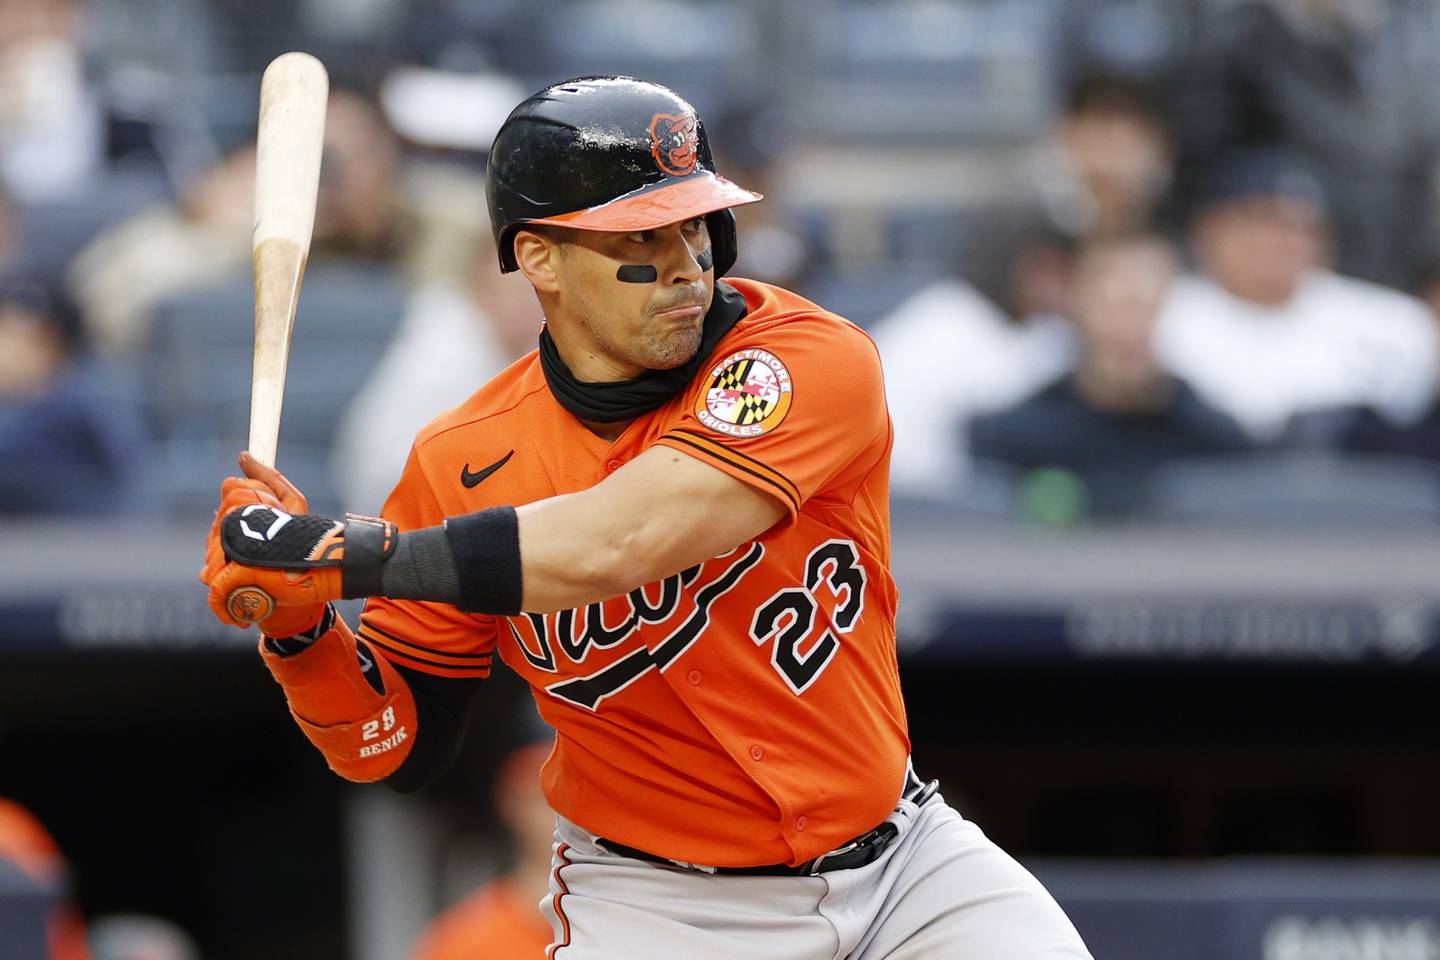 NEW YORK, NEW YORK - OCTOBER 01: Robinson Chirinos #23 of the Baltimore Orioles at bat during the sixth inning against the New York Yankees at Yankee Stadium on October 01, 2022 in the Bronx borough of New York City.